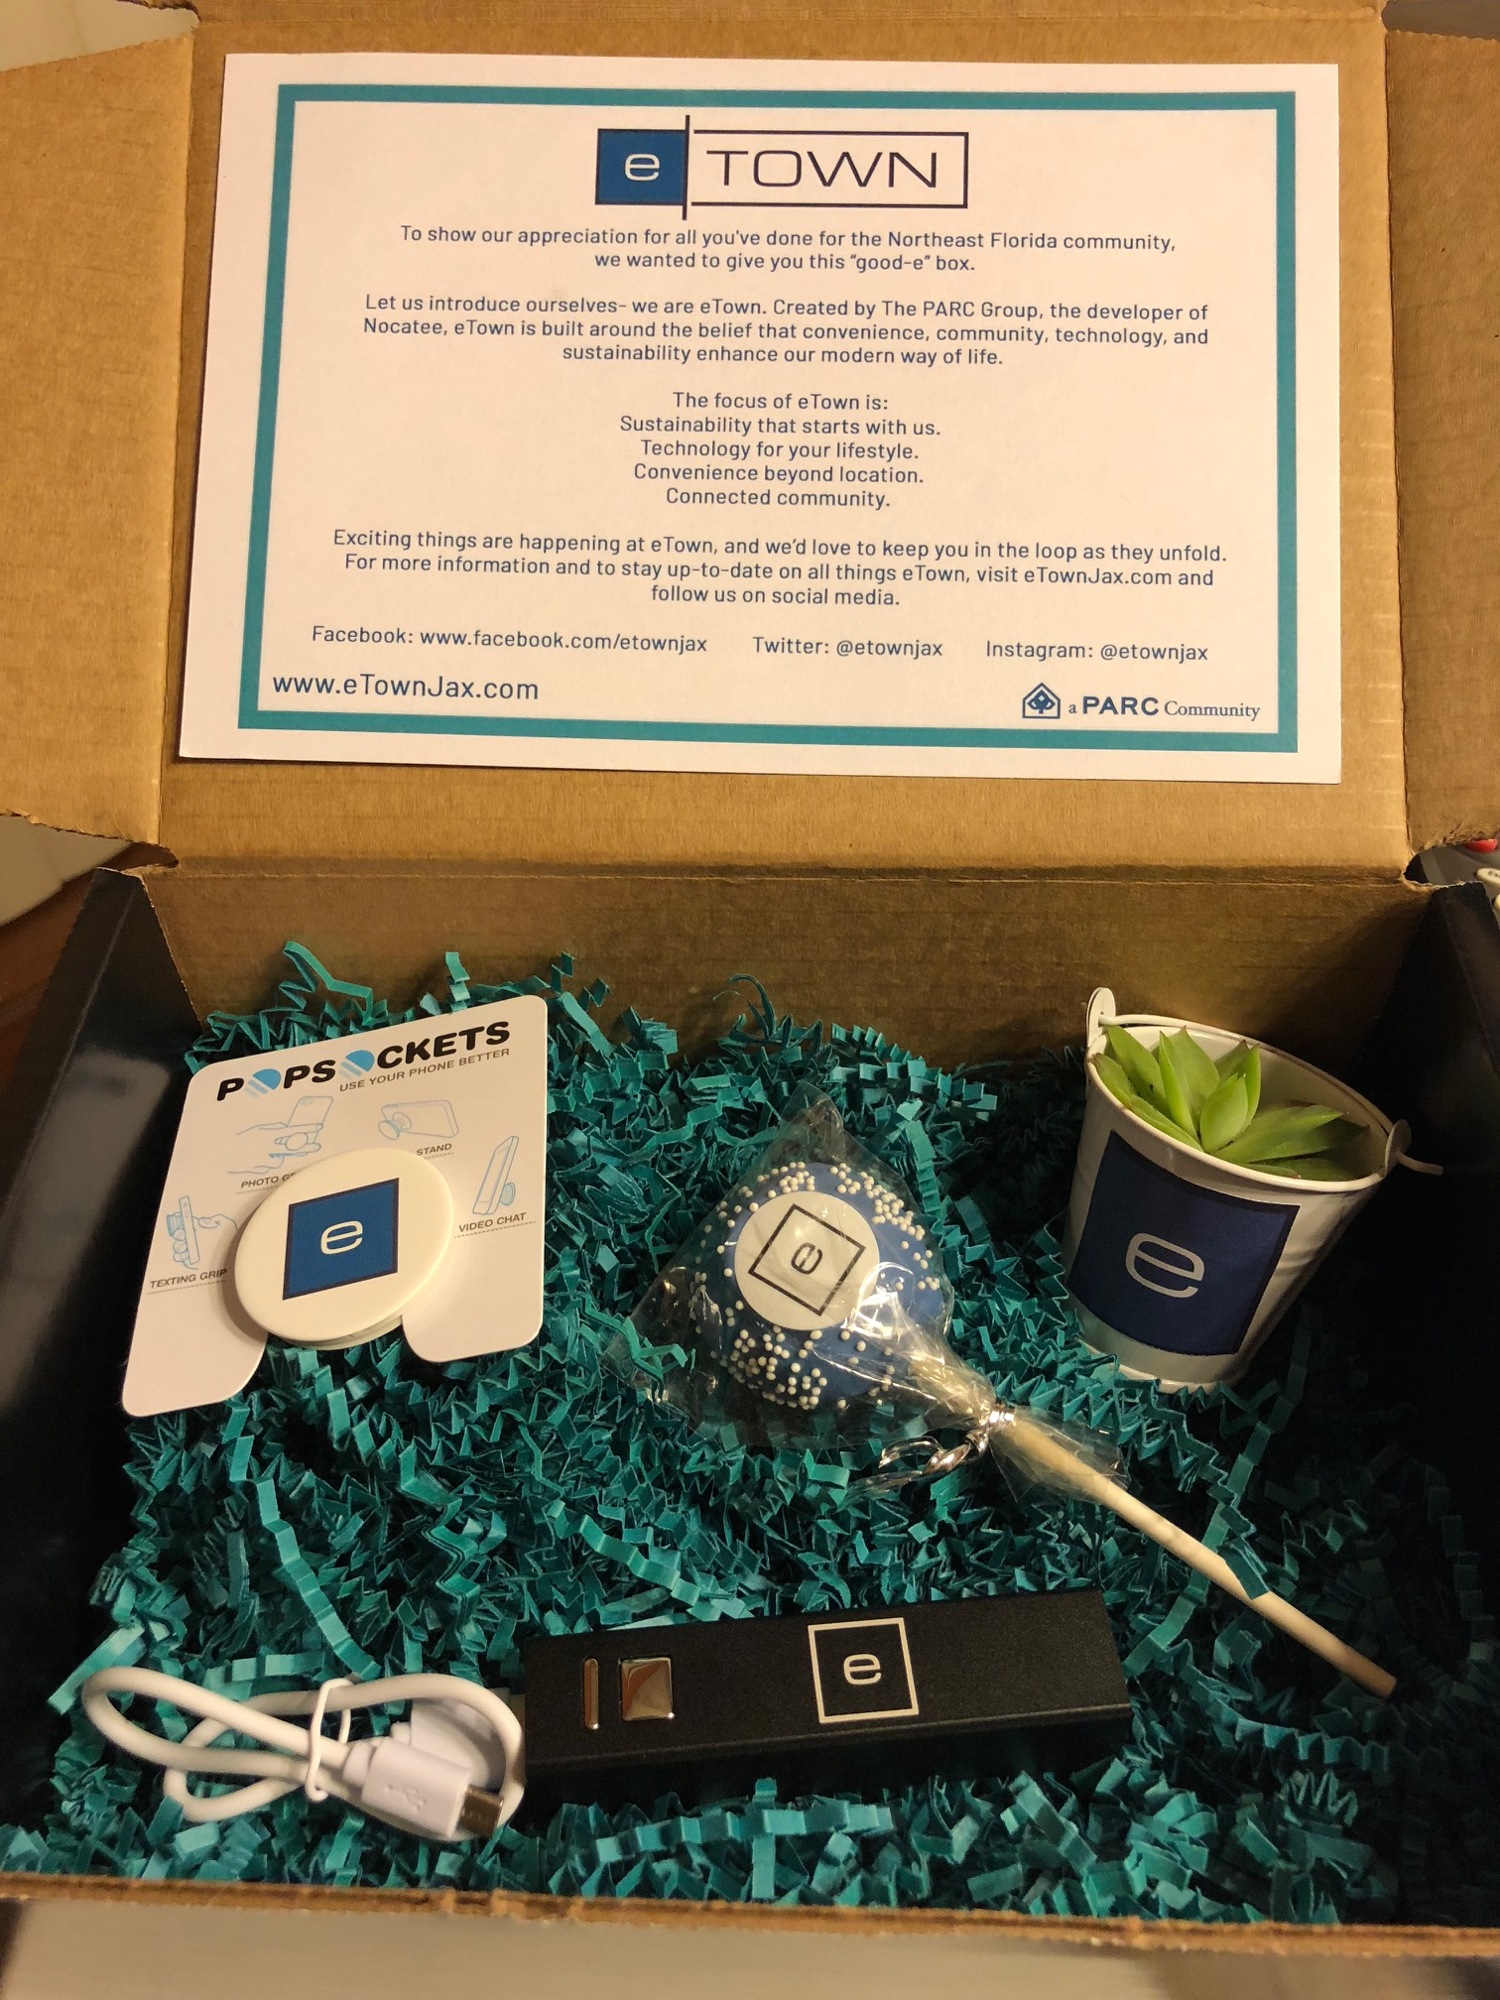 The “good-e” box contains a plant, a portable mobile Power Bank, a Popsockets mobile phone accessory and a cake pop.